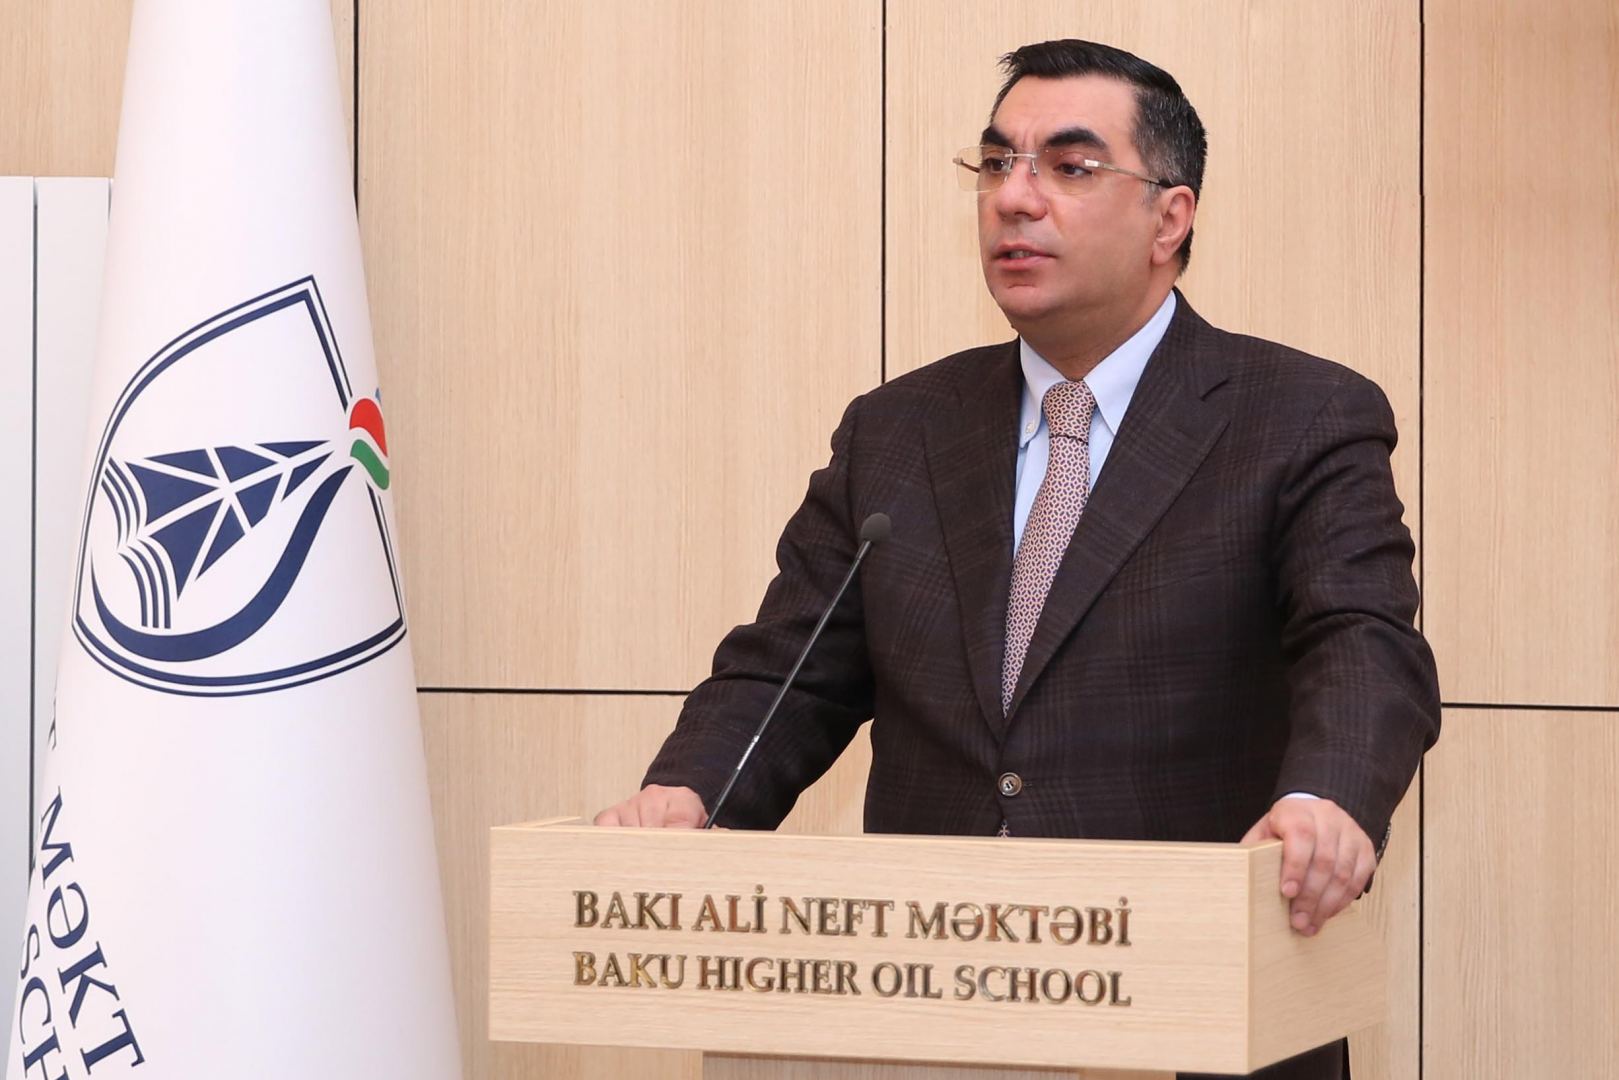 Baku Higher Oil School honors victims of March 31 Genocide (PHOTO)